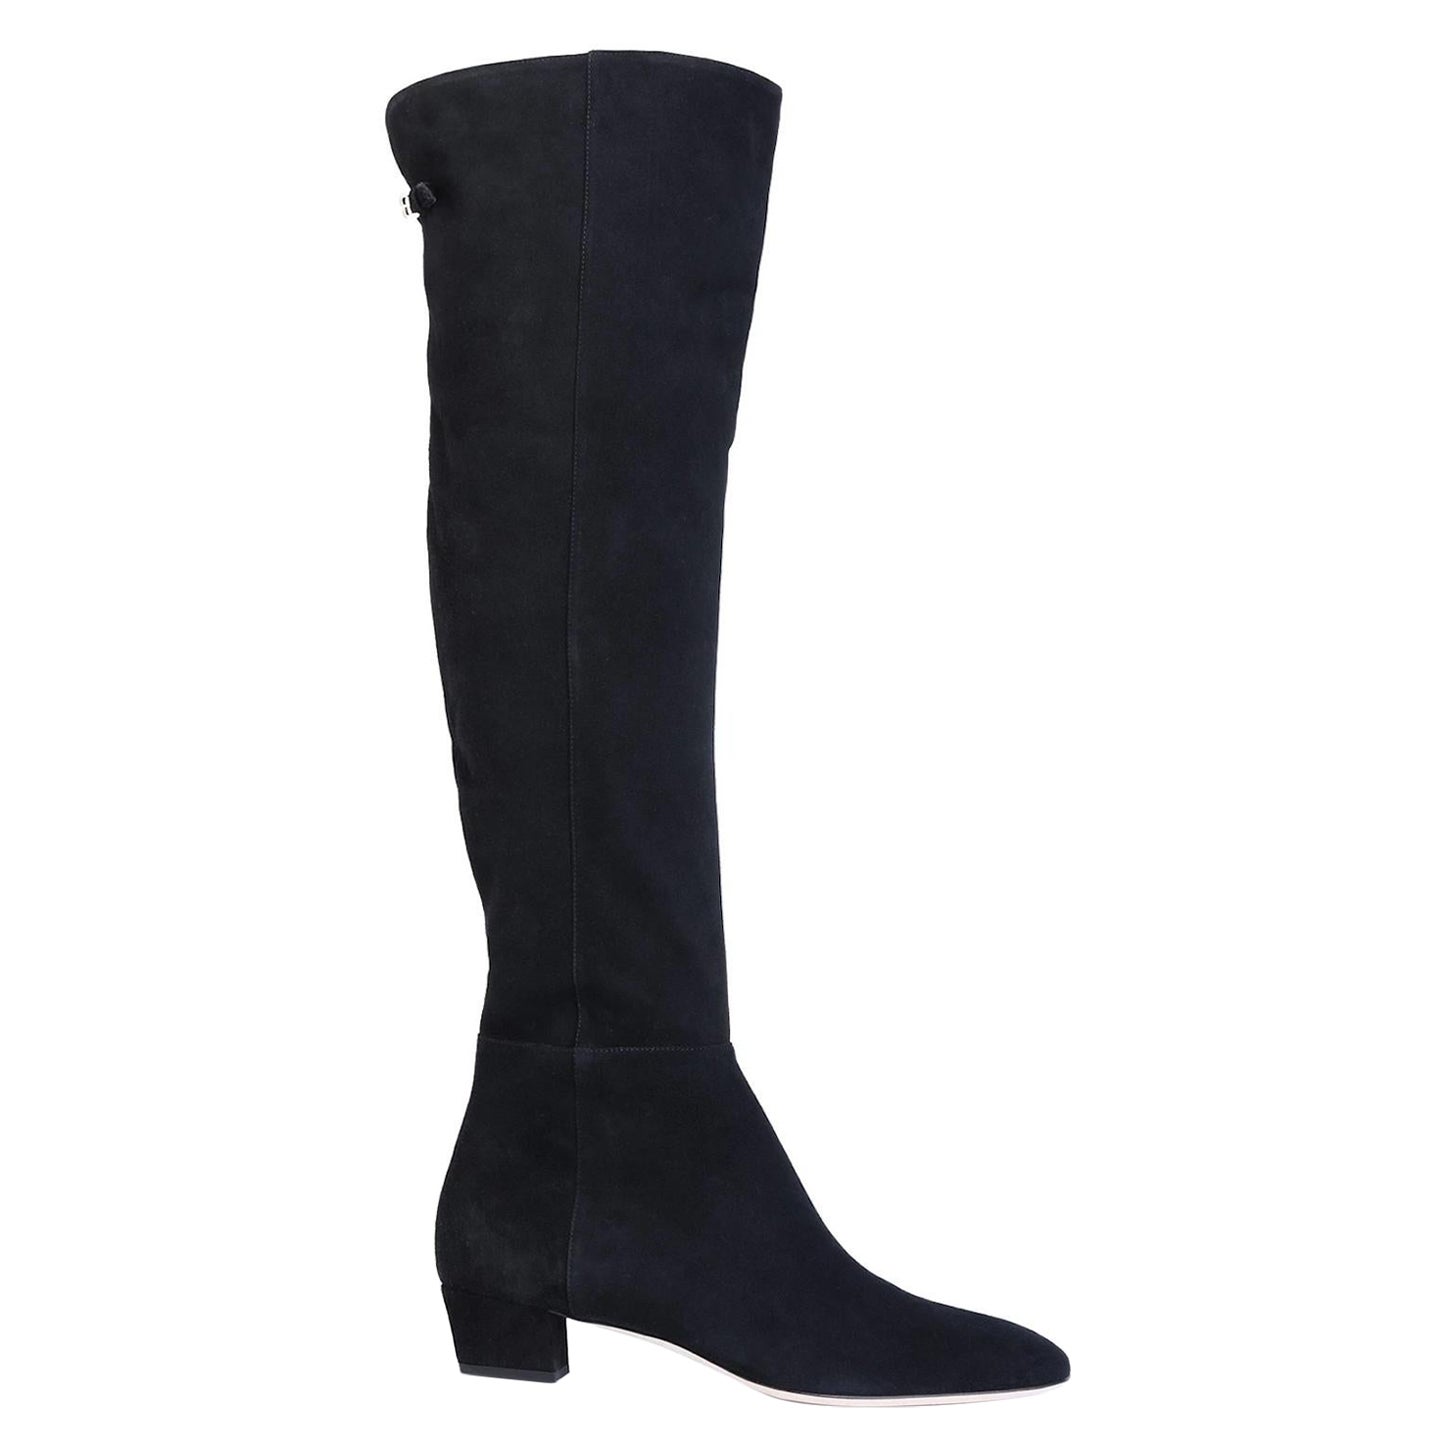 Sergio Rossi Black Suede Over the Knee Boots (40 EU) For Sale